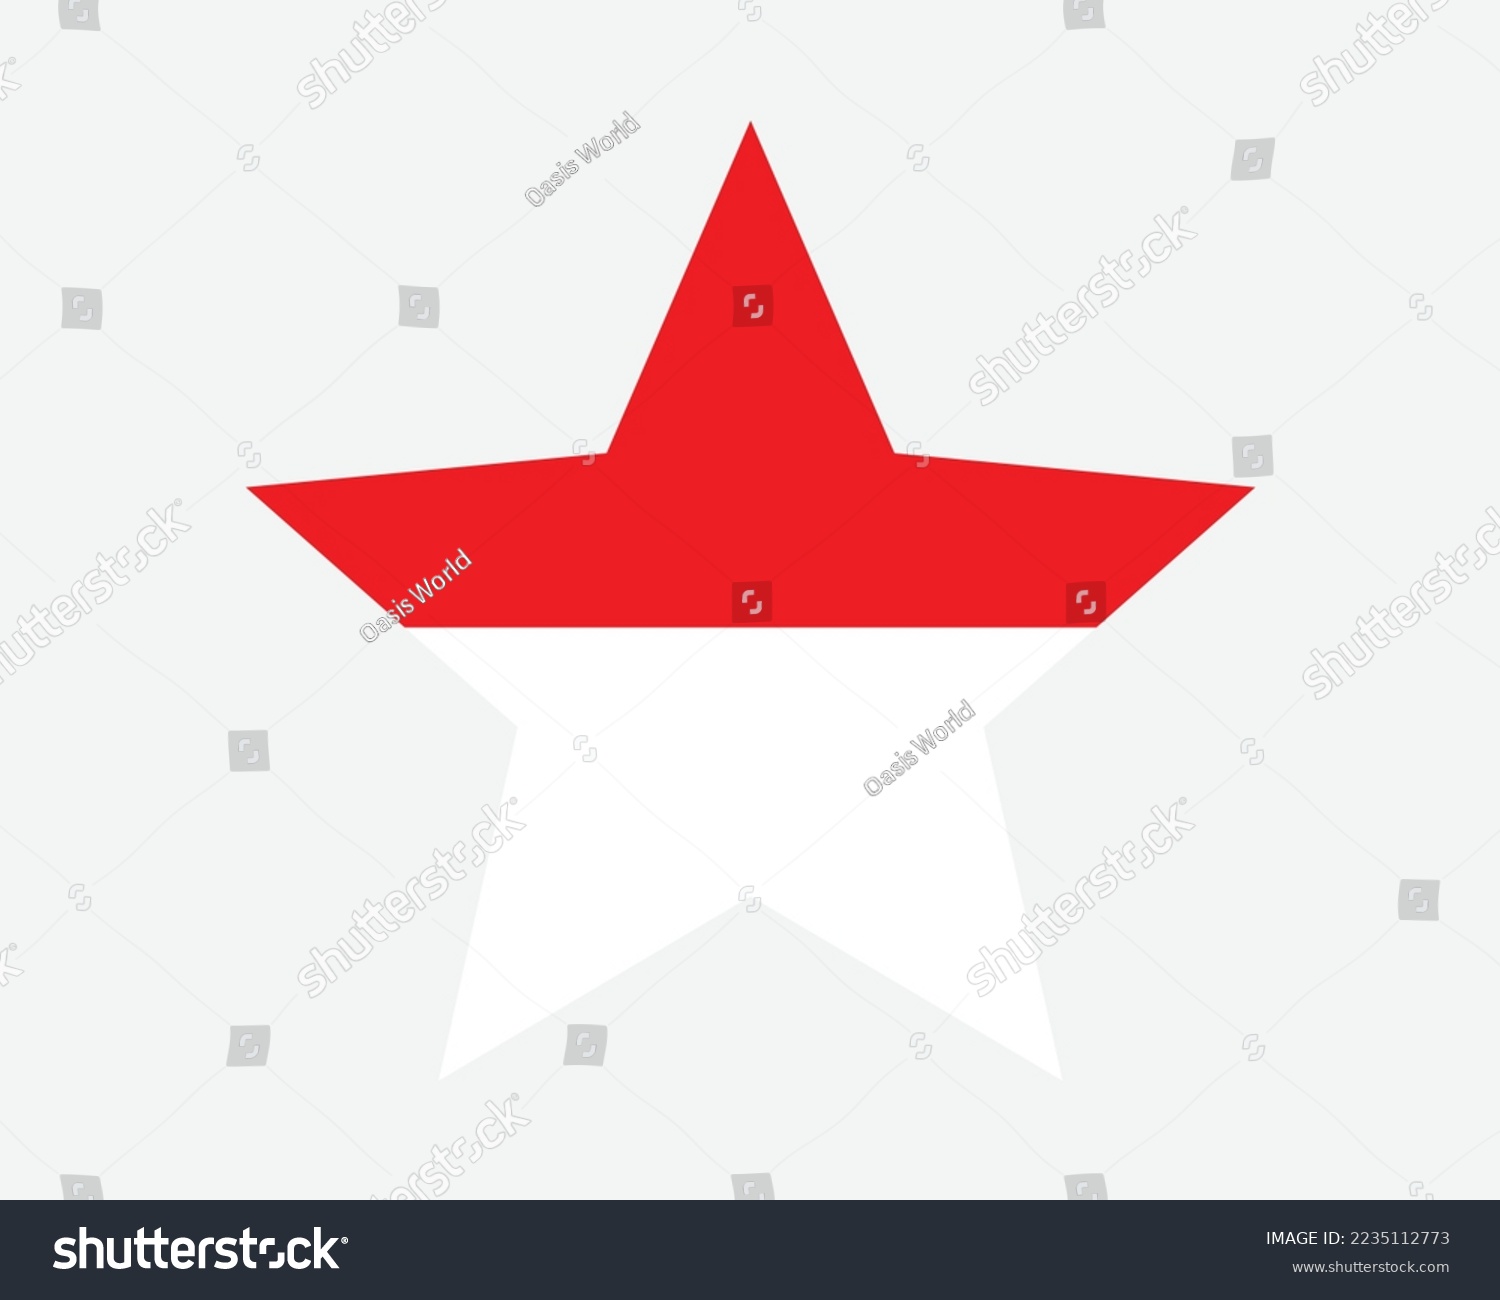 SVG of Indonesia Star Flag. Indonesian Star Shape Flag. Republic of Indonesia Country National Banner Icon Symbol Vector Flat Artwork Graphic Illustration svg